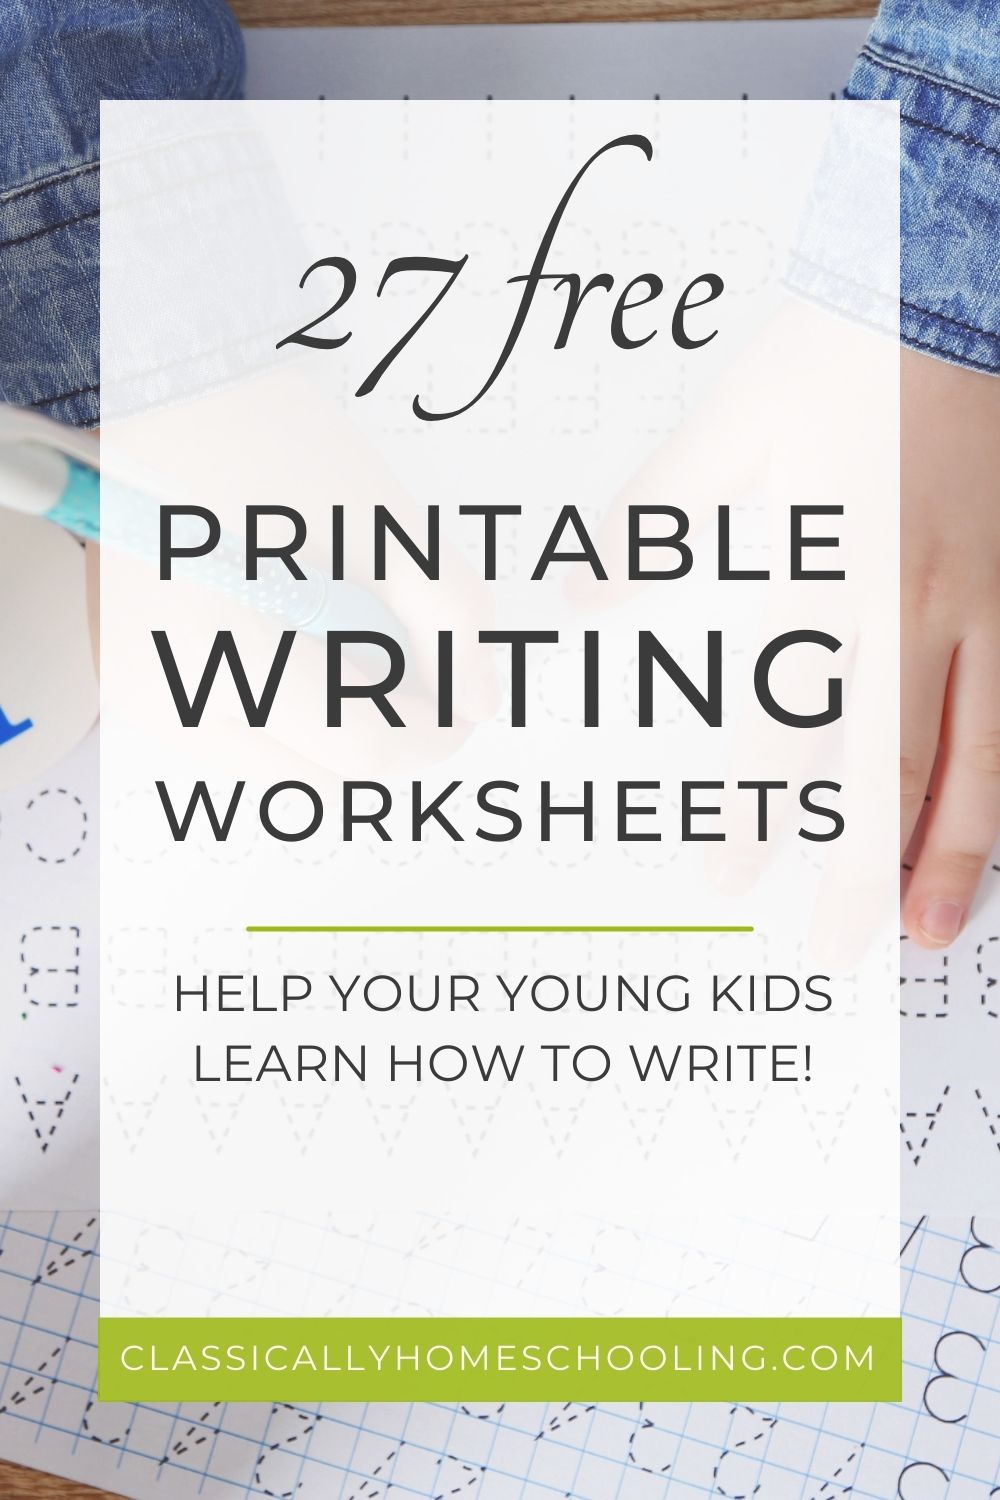 writing kindergarten worksheets to help young kids learn to write